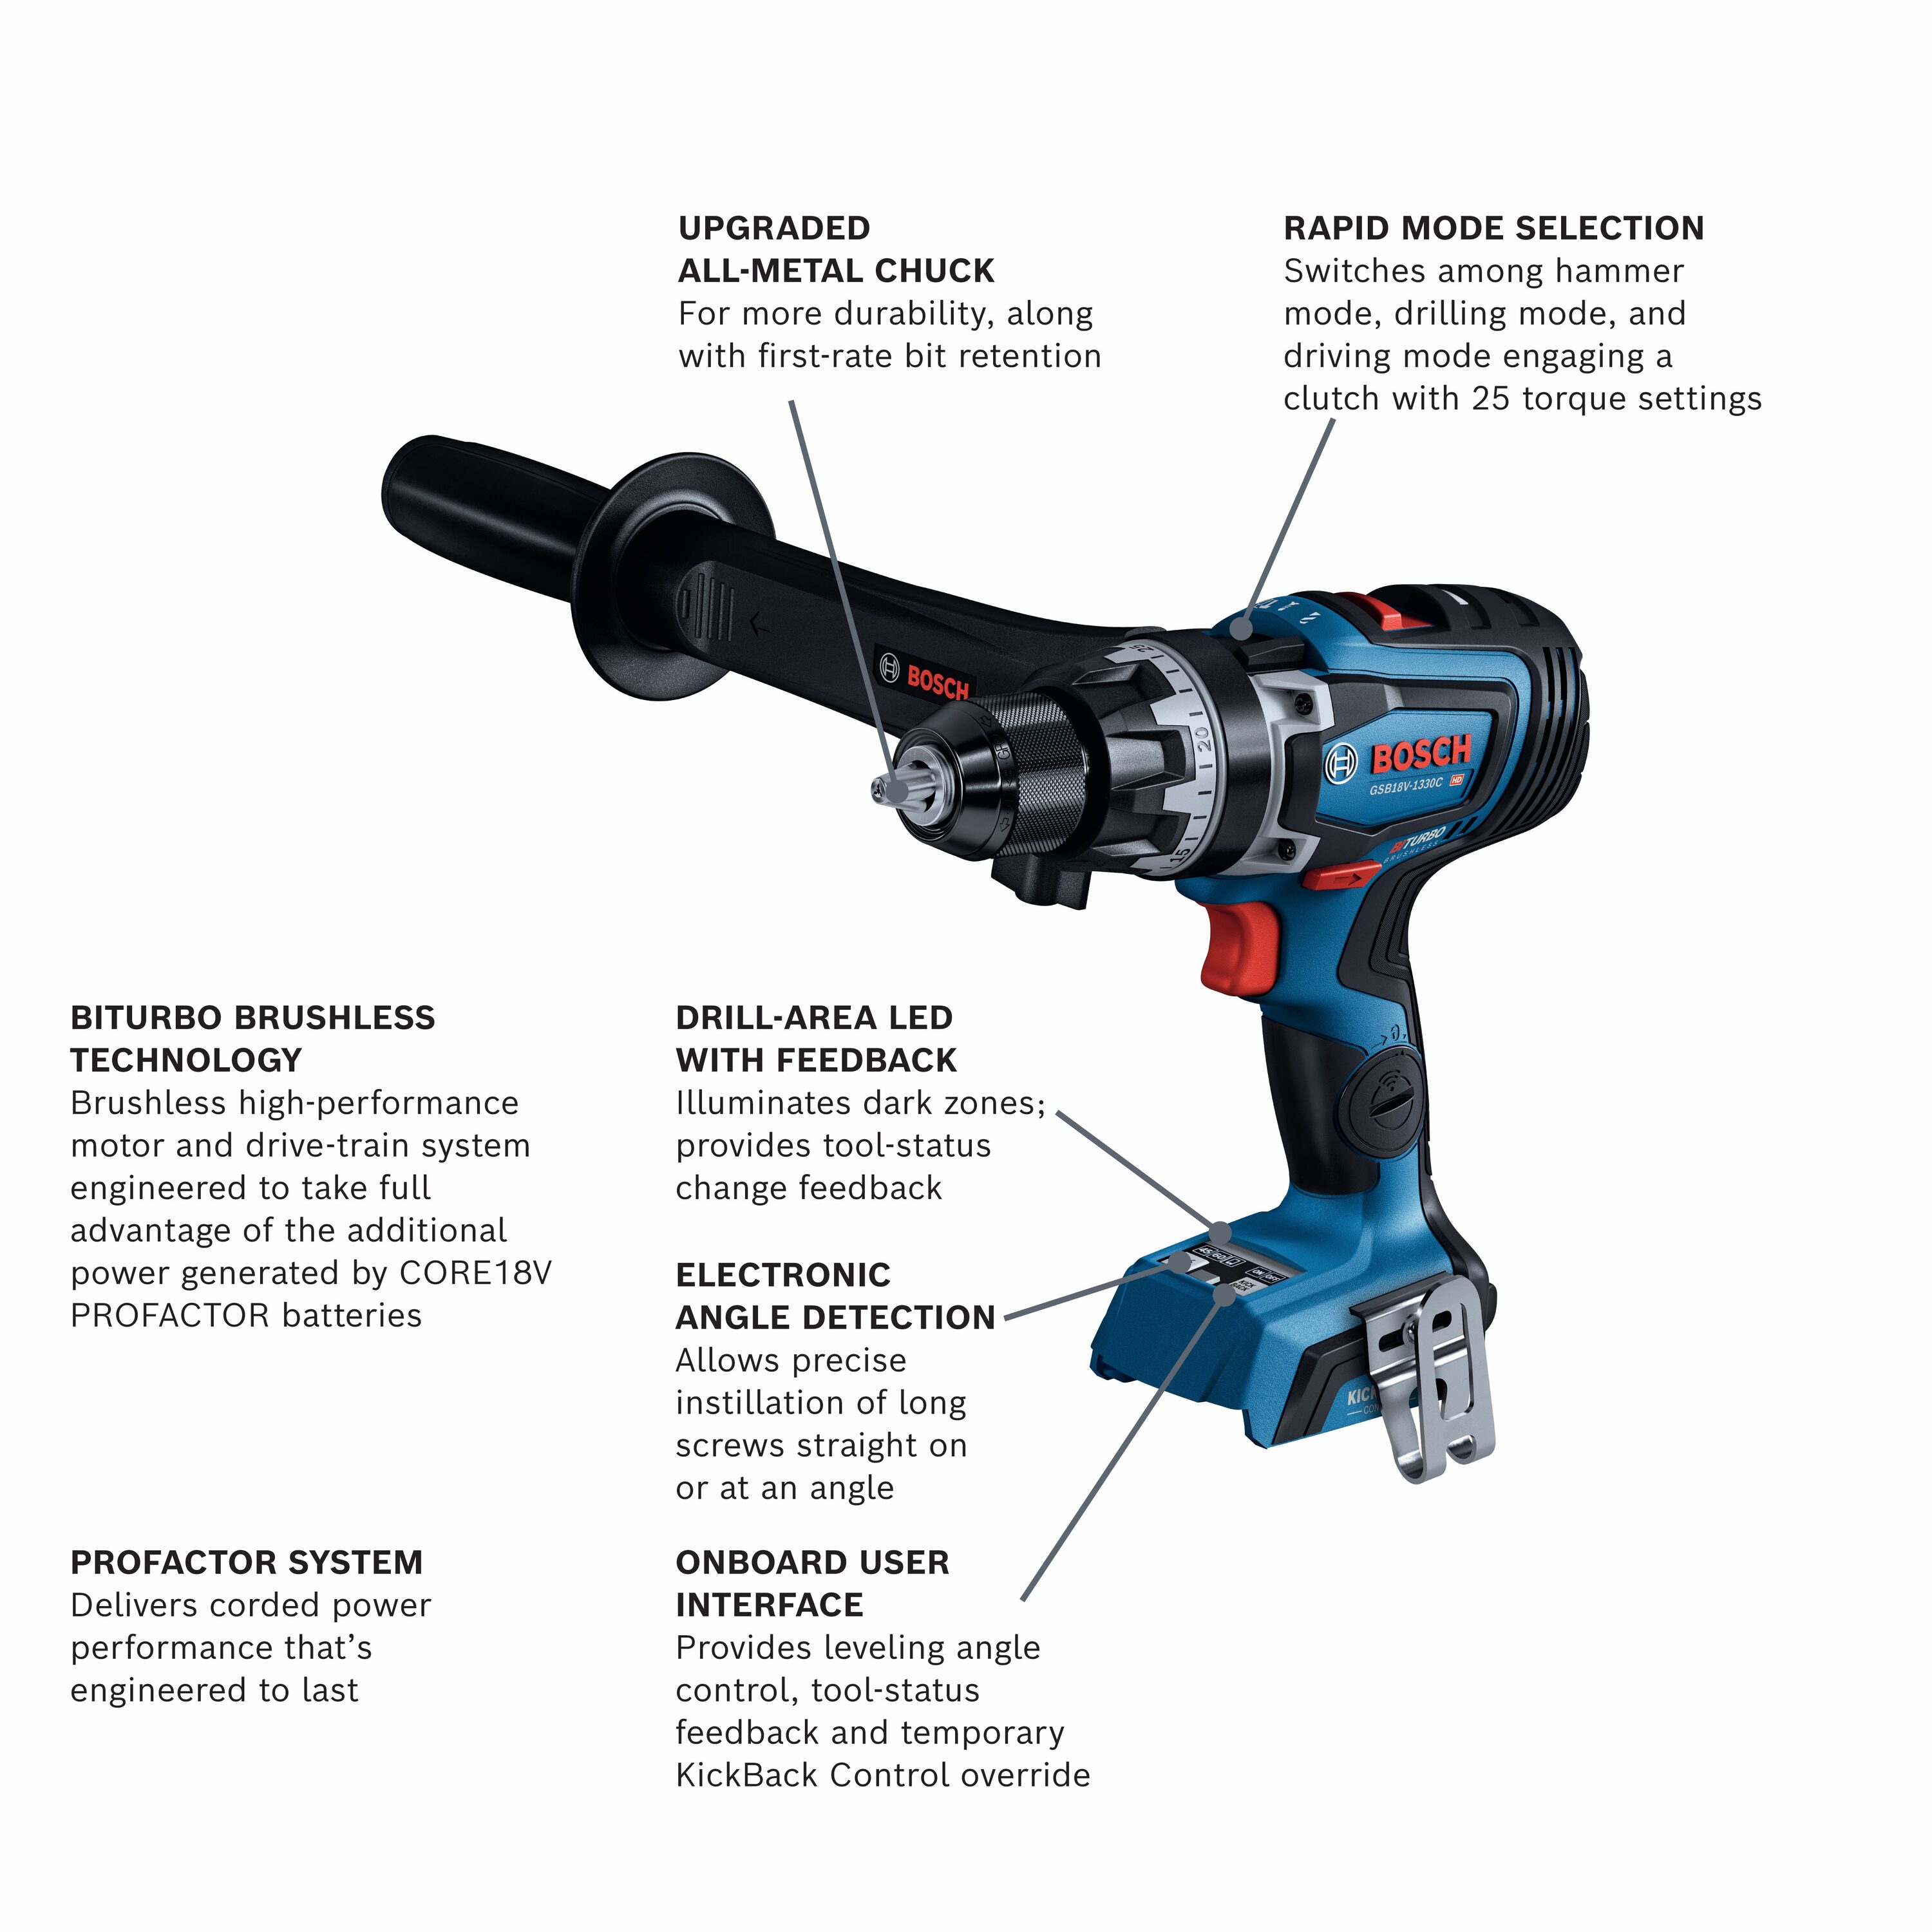 Bosch Professional 18 V Cordless Drills for sale